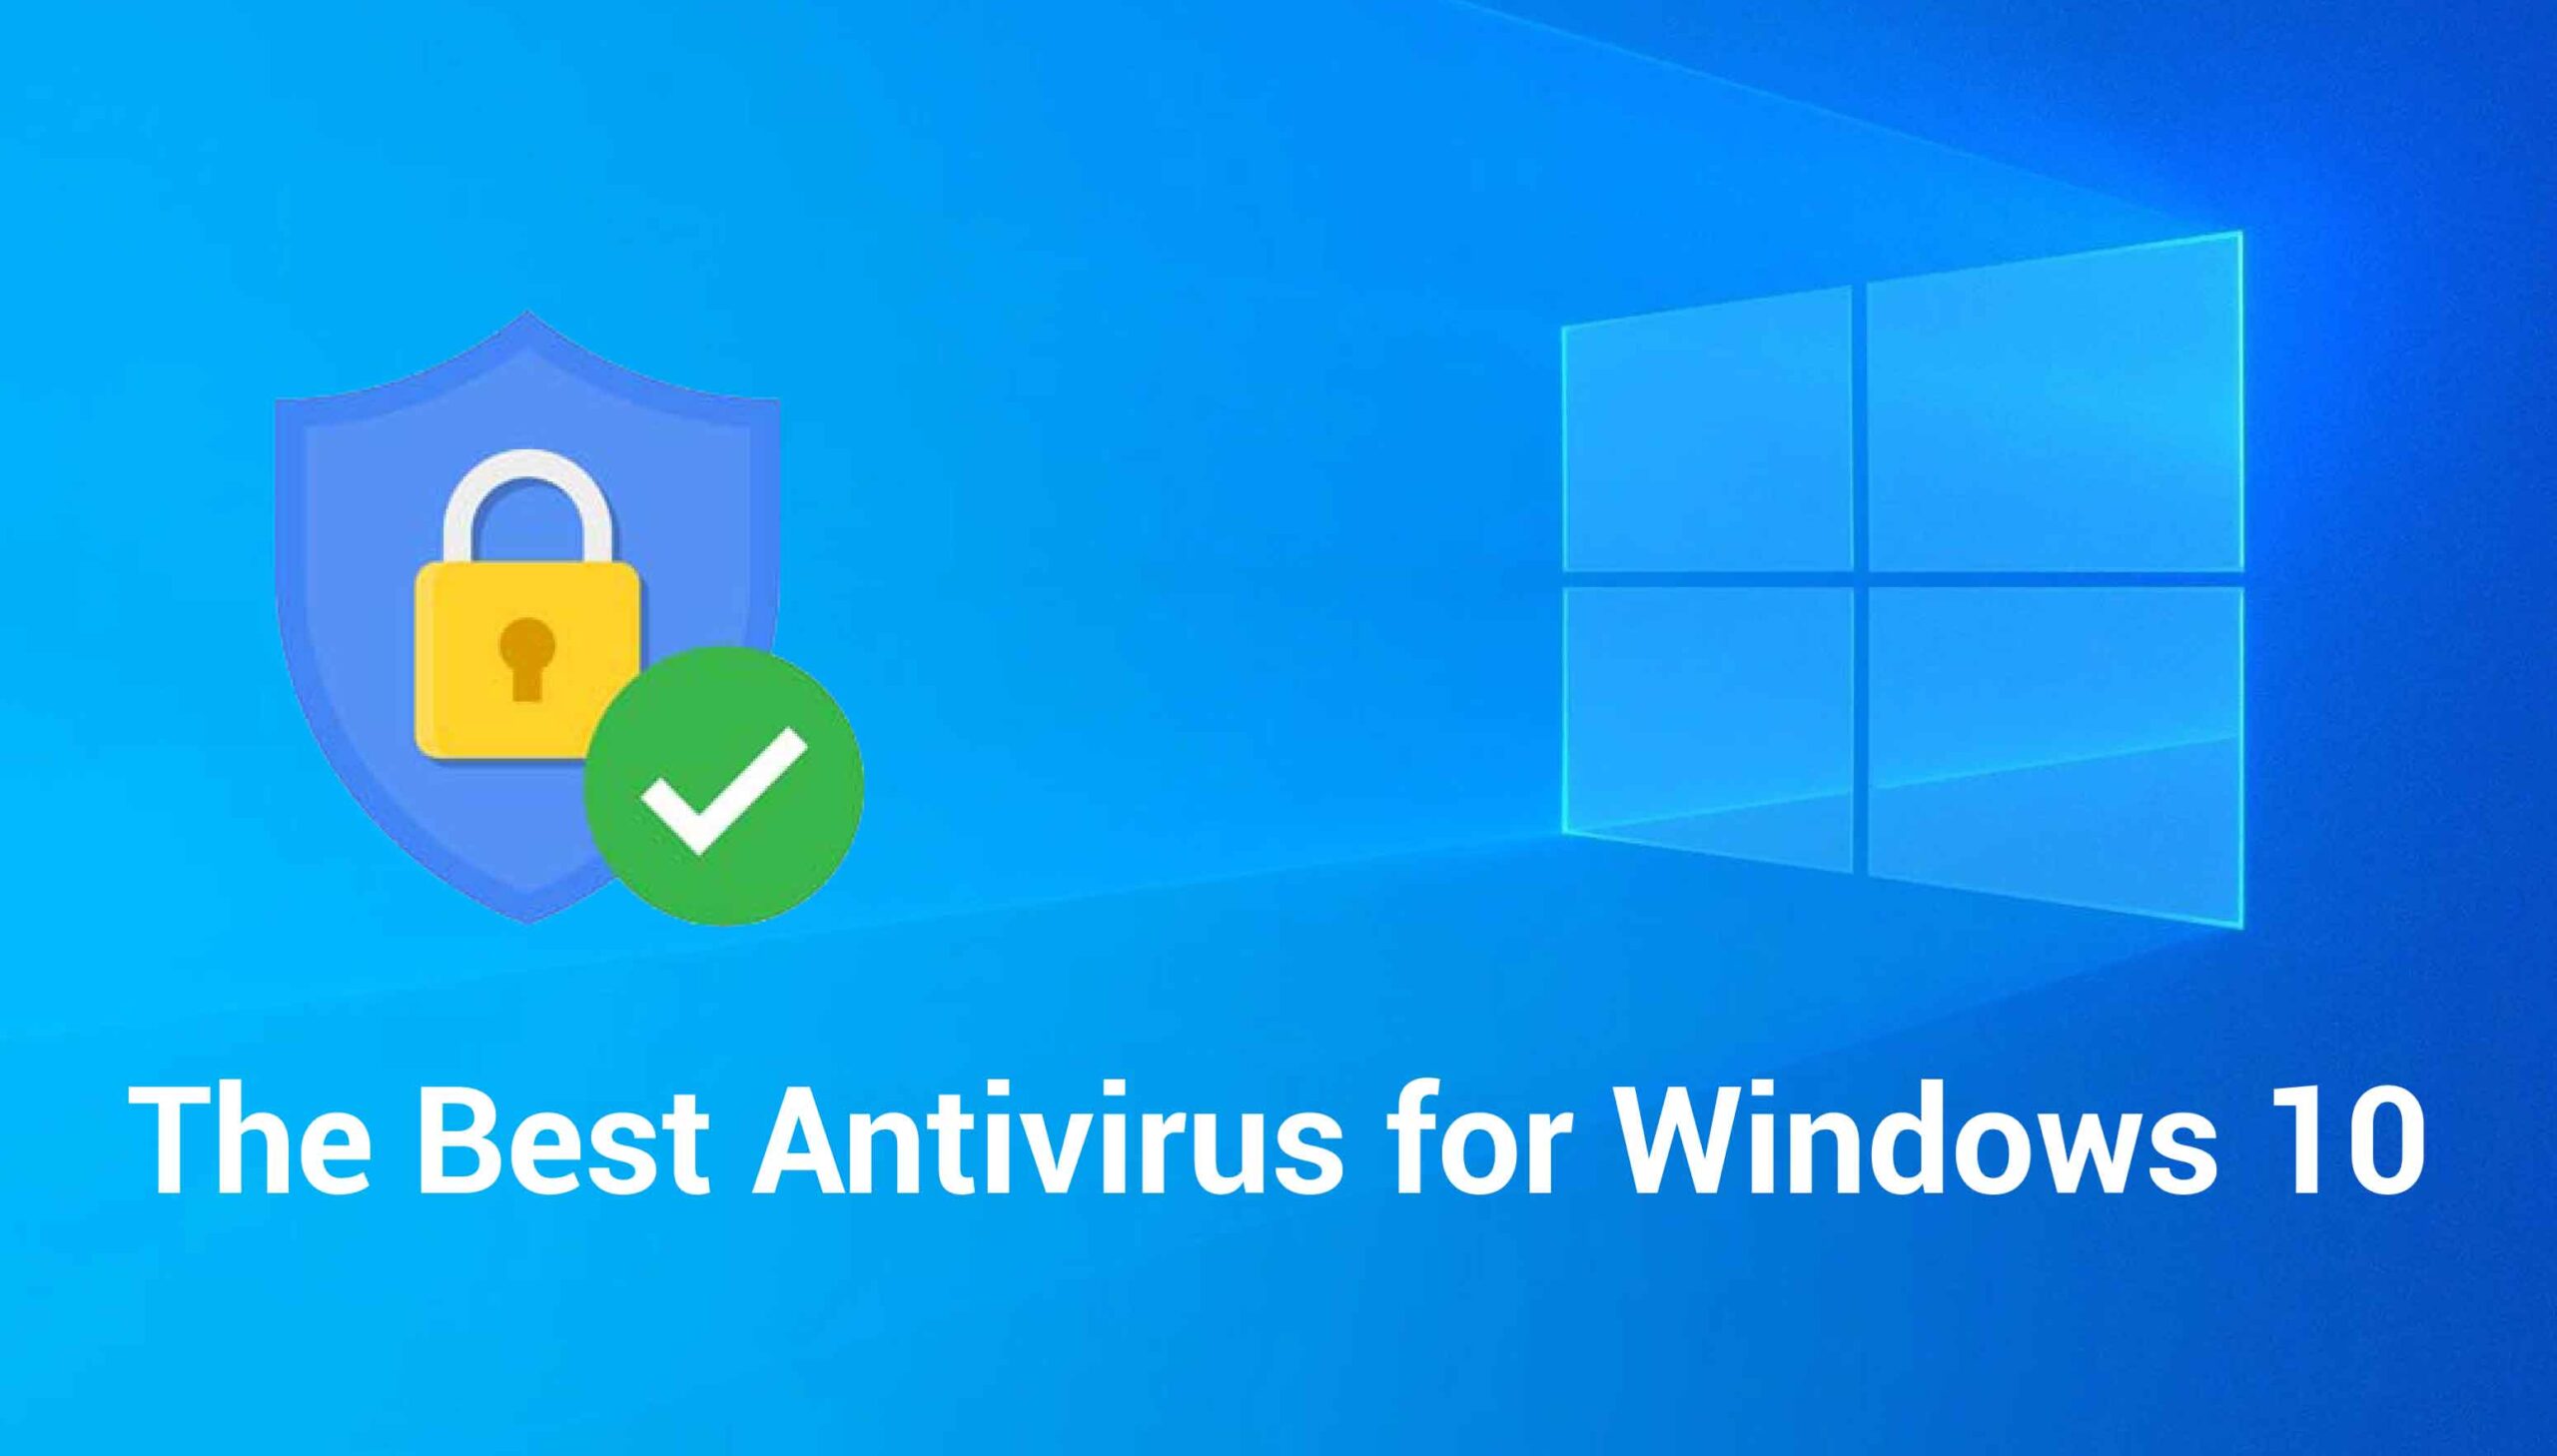 The best antivirus for Windows 10 (and 11) 4